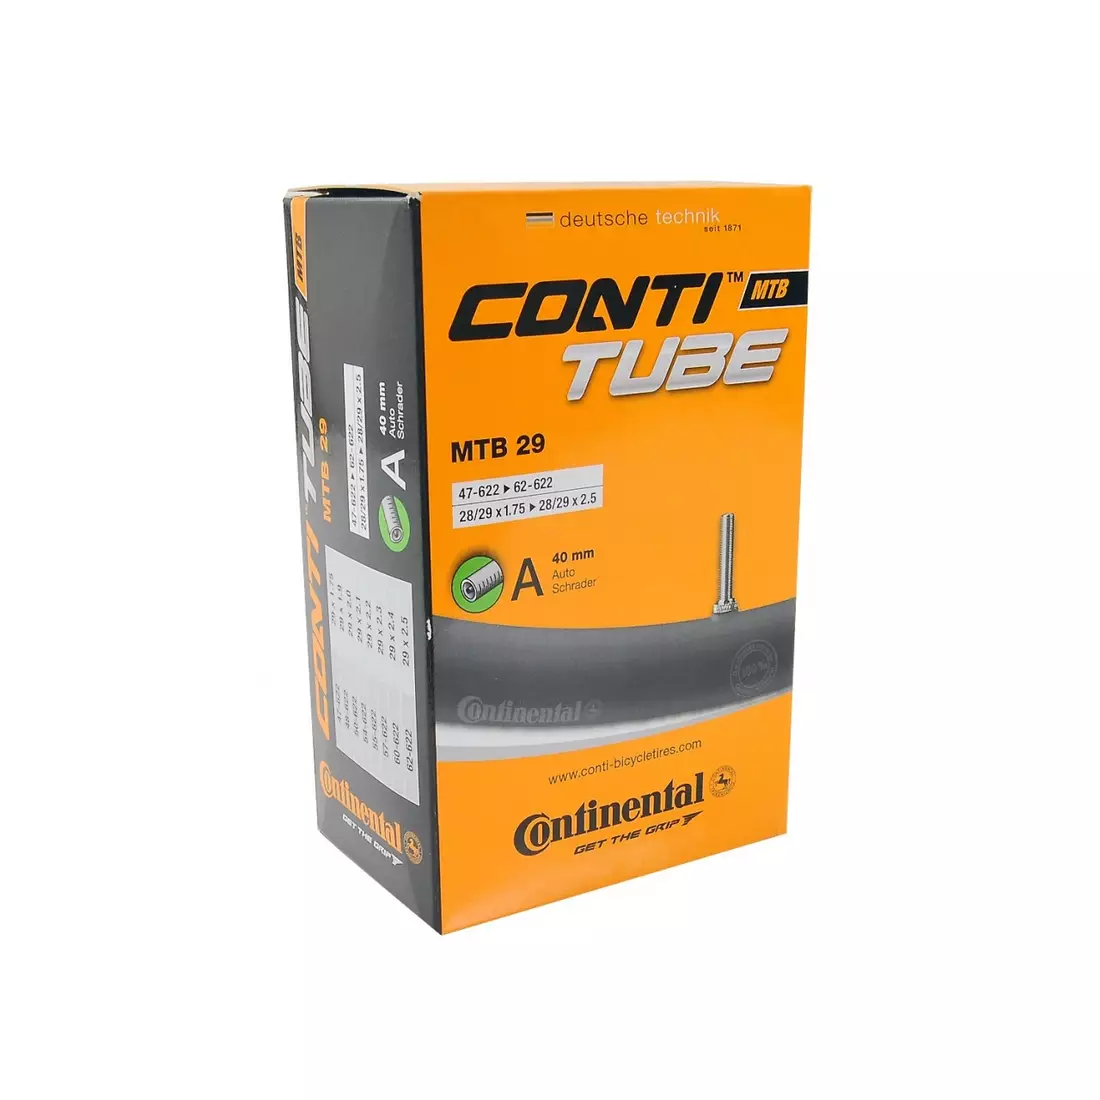 CONTINENTAL bicycle inner tube MTB 28/29 auto 40mm 47-662/62-662 28/29x1,75-28/29x2,5